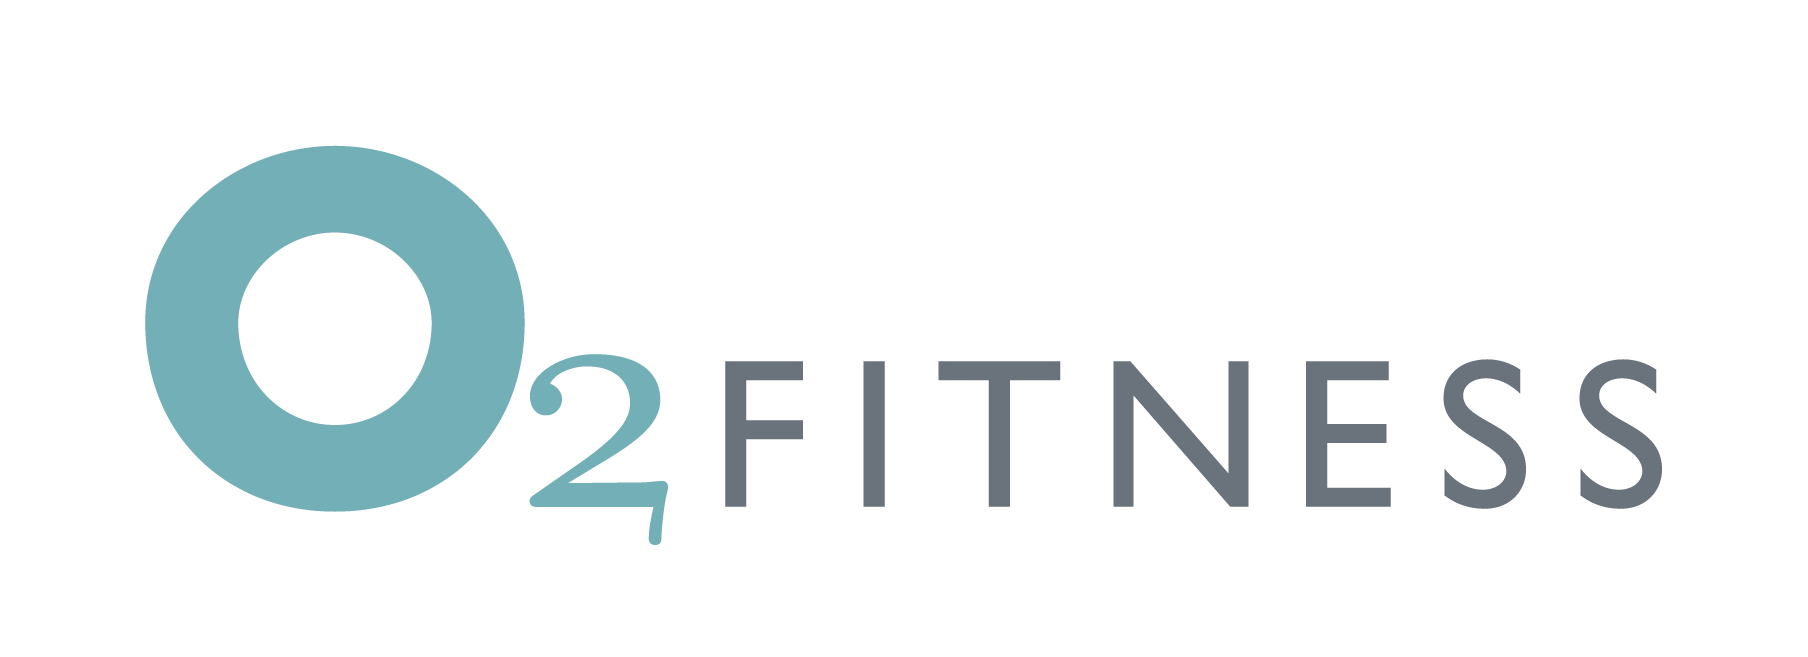 MSN Fitness Logo - O2 Fitness Clubs. Gyms, Personal Training and Group Fitness Classes